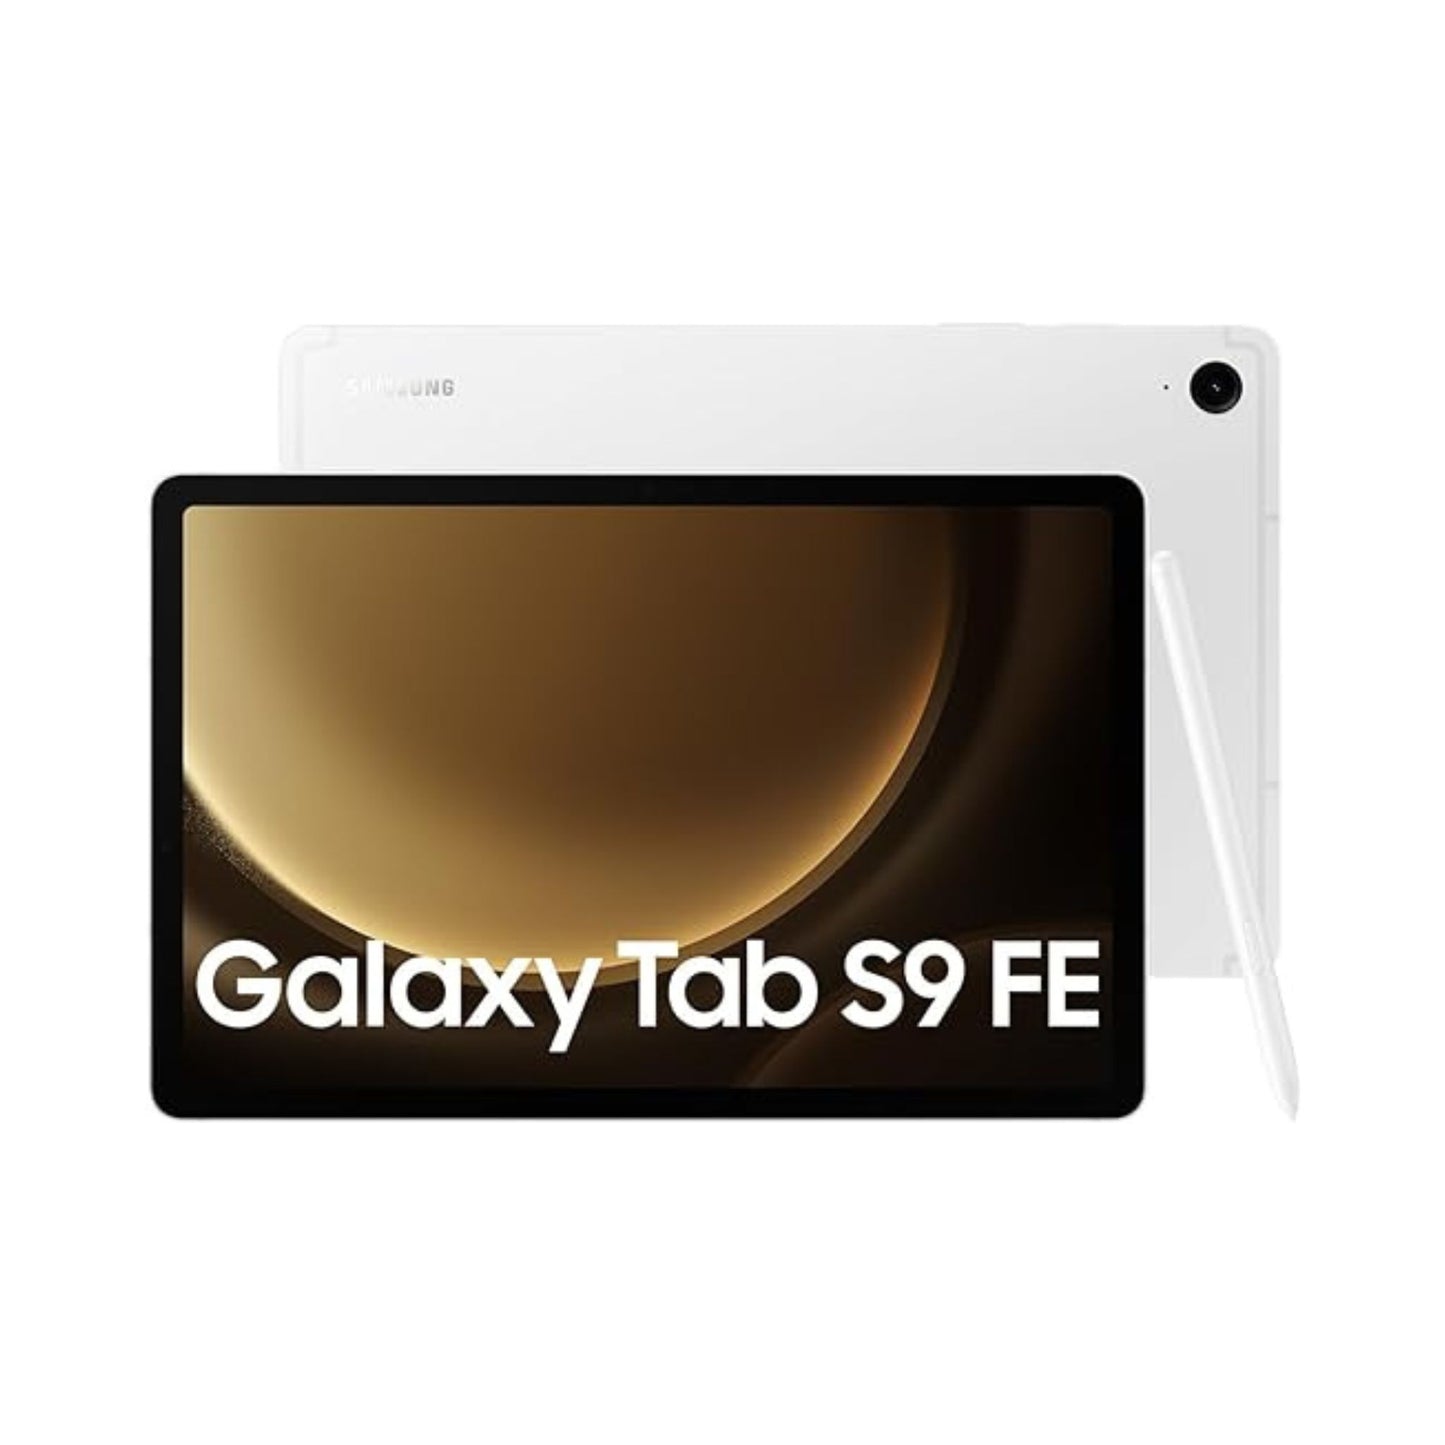 Samsung Galaxy Tab S9 FE_WiFi Android Tablet_S Pen Included_Silver(UAE Version)